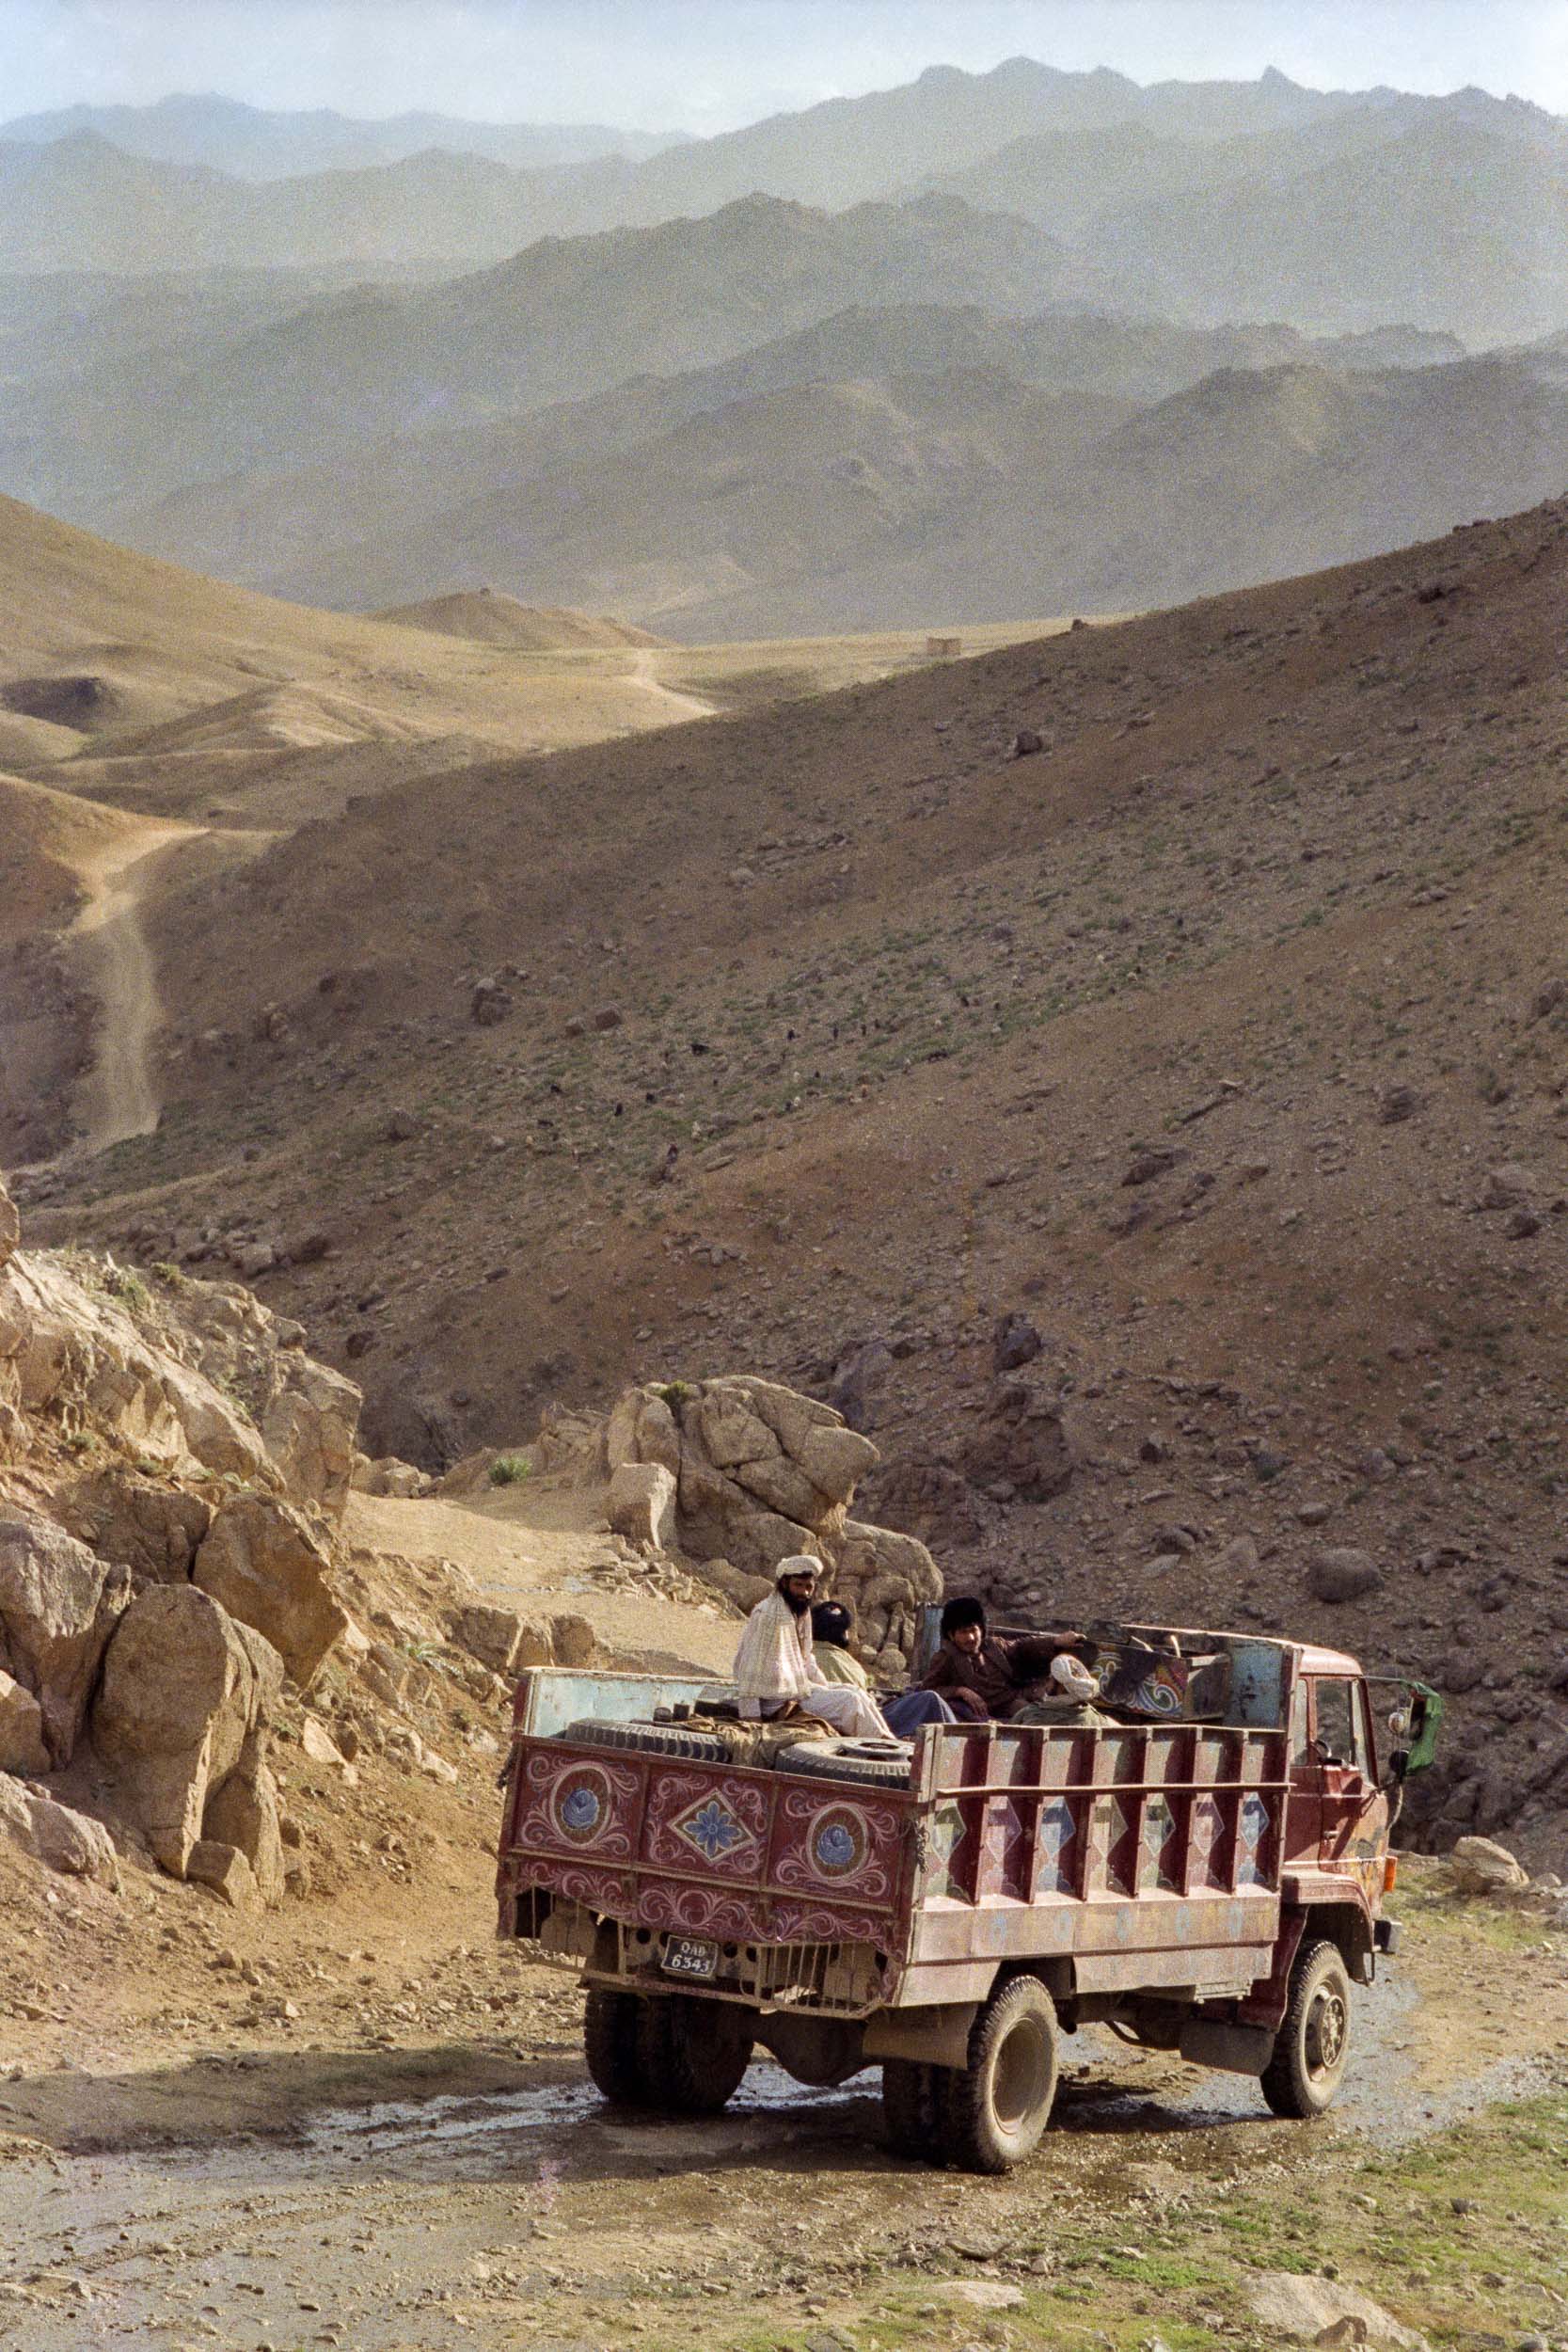  On the Road, Afghanistan 1988